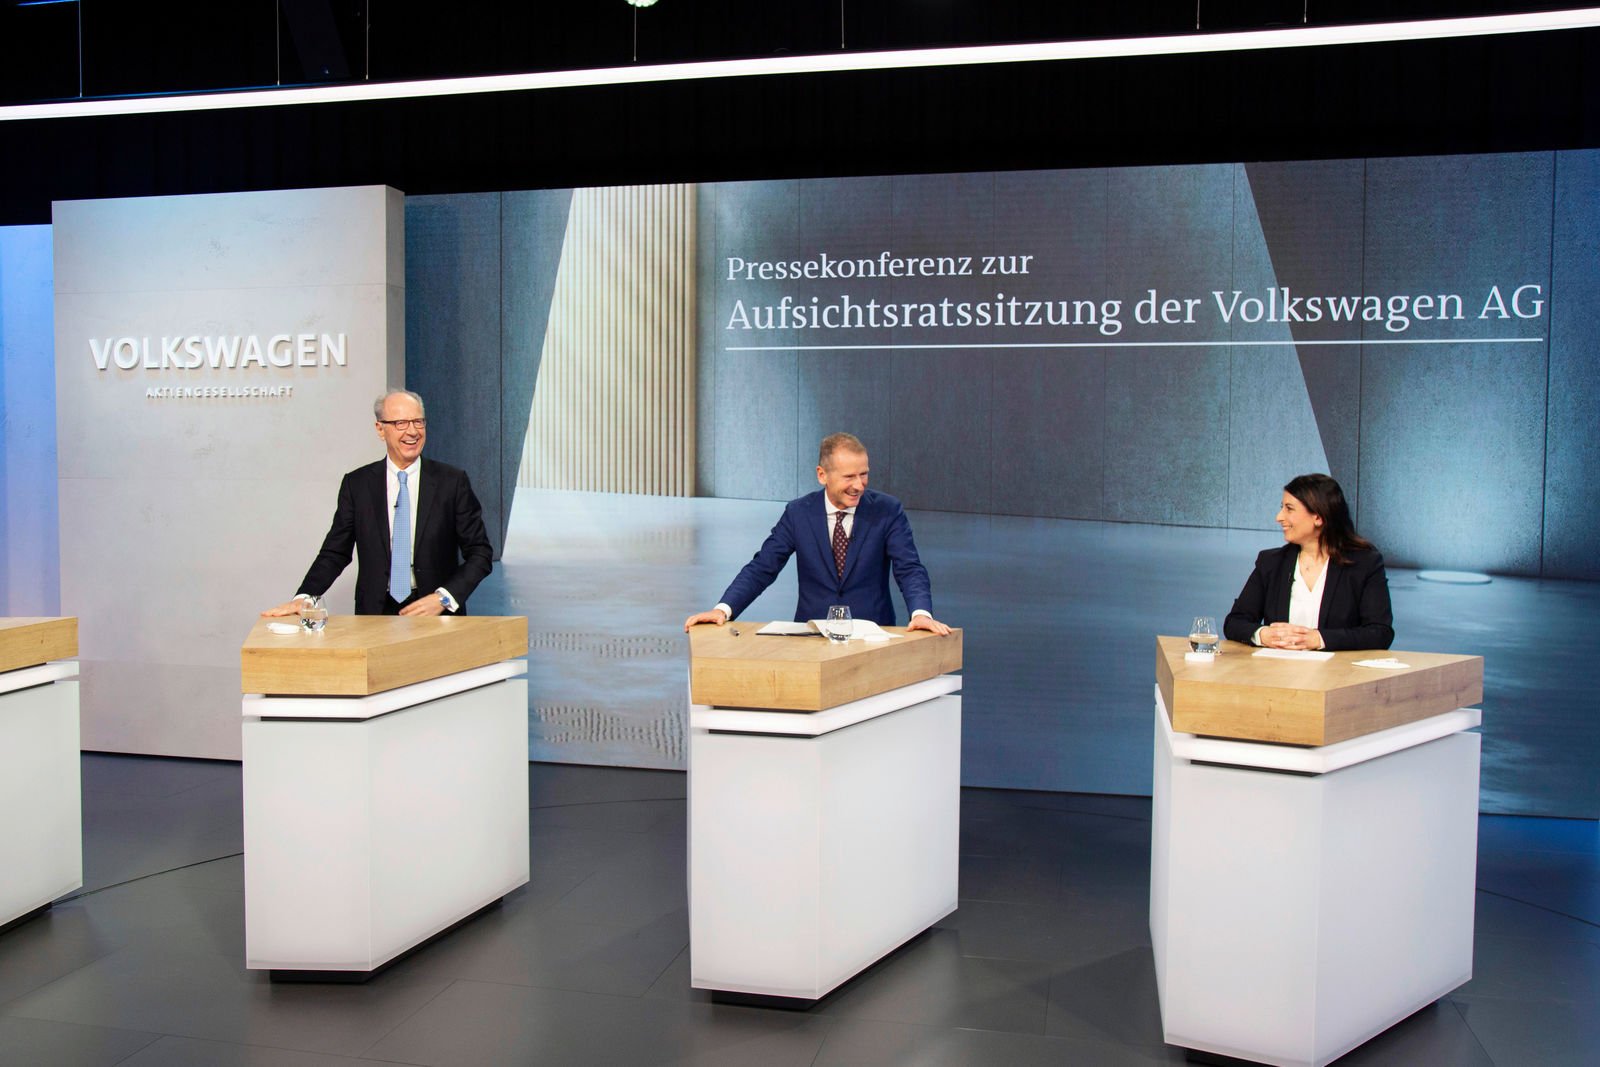 Press conference on the Supervisory Board meeting of Volkswagen AG